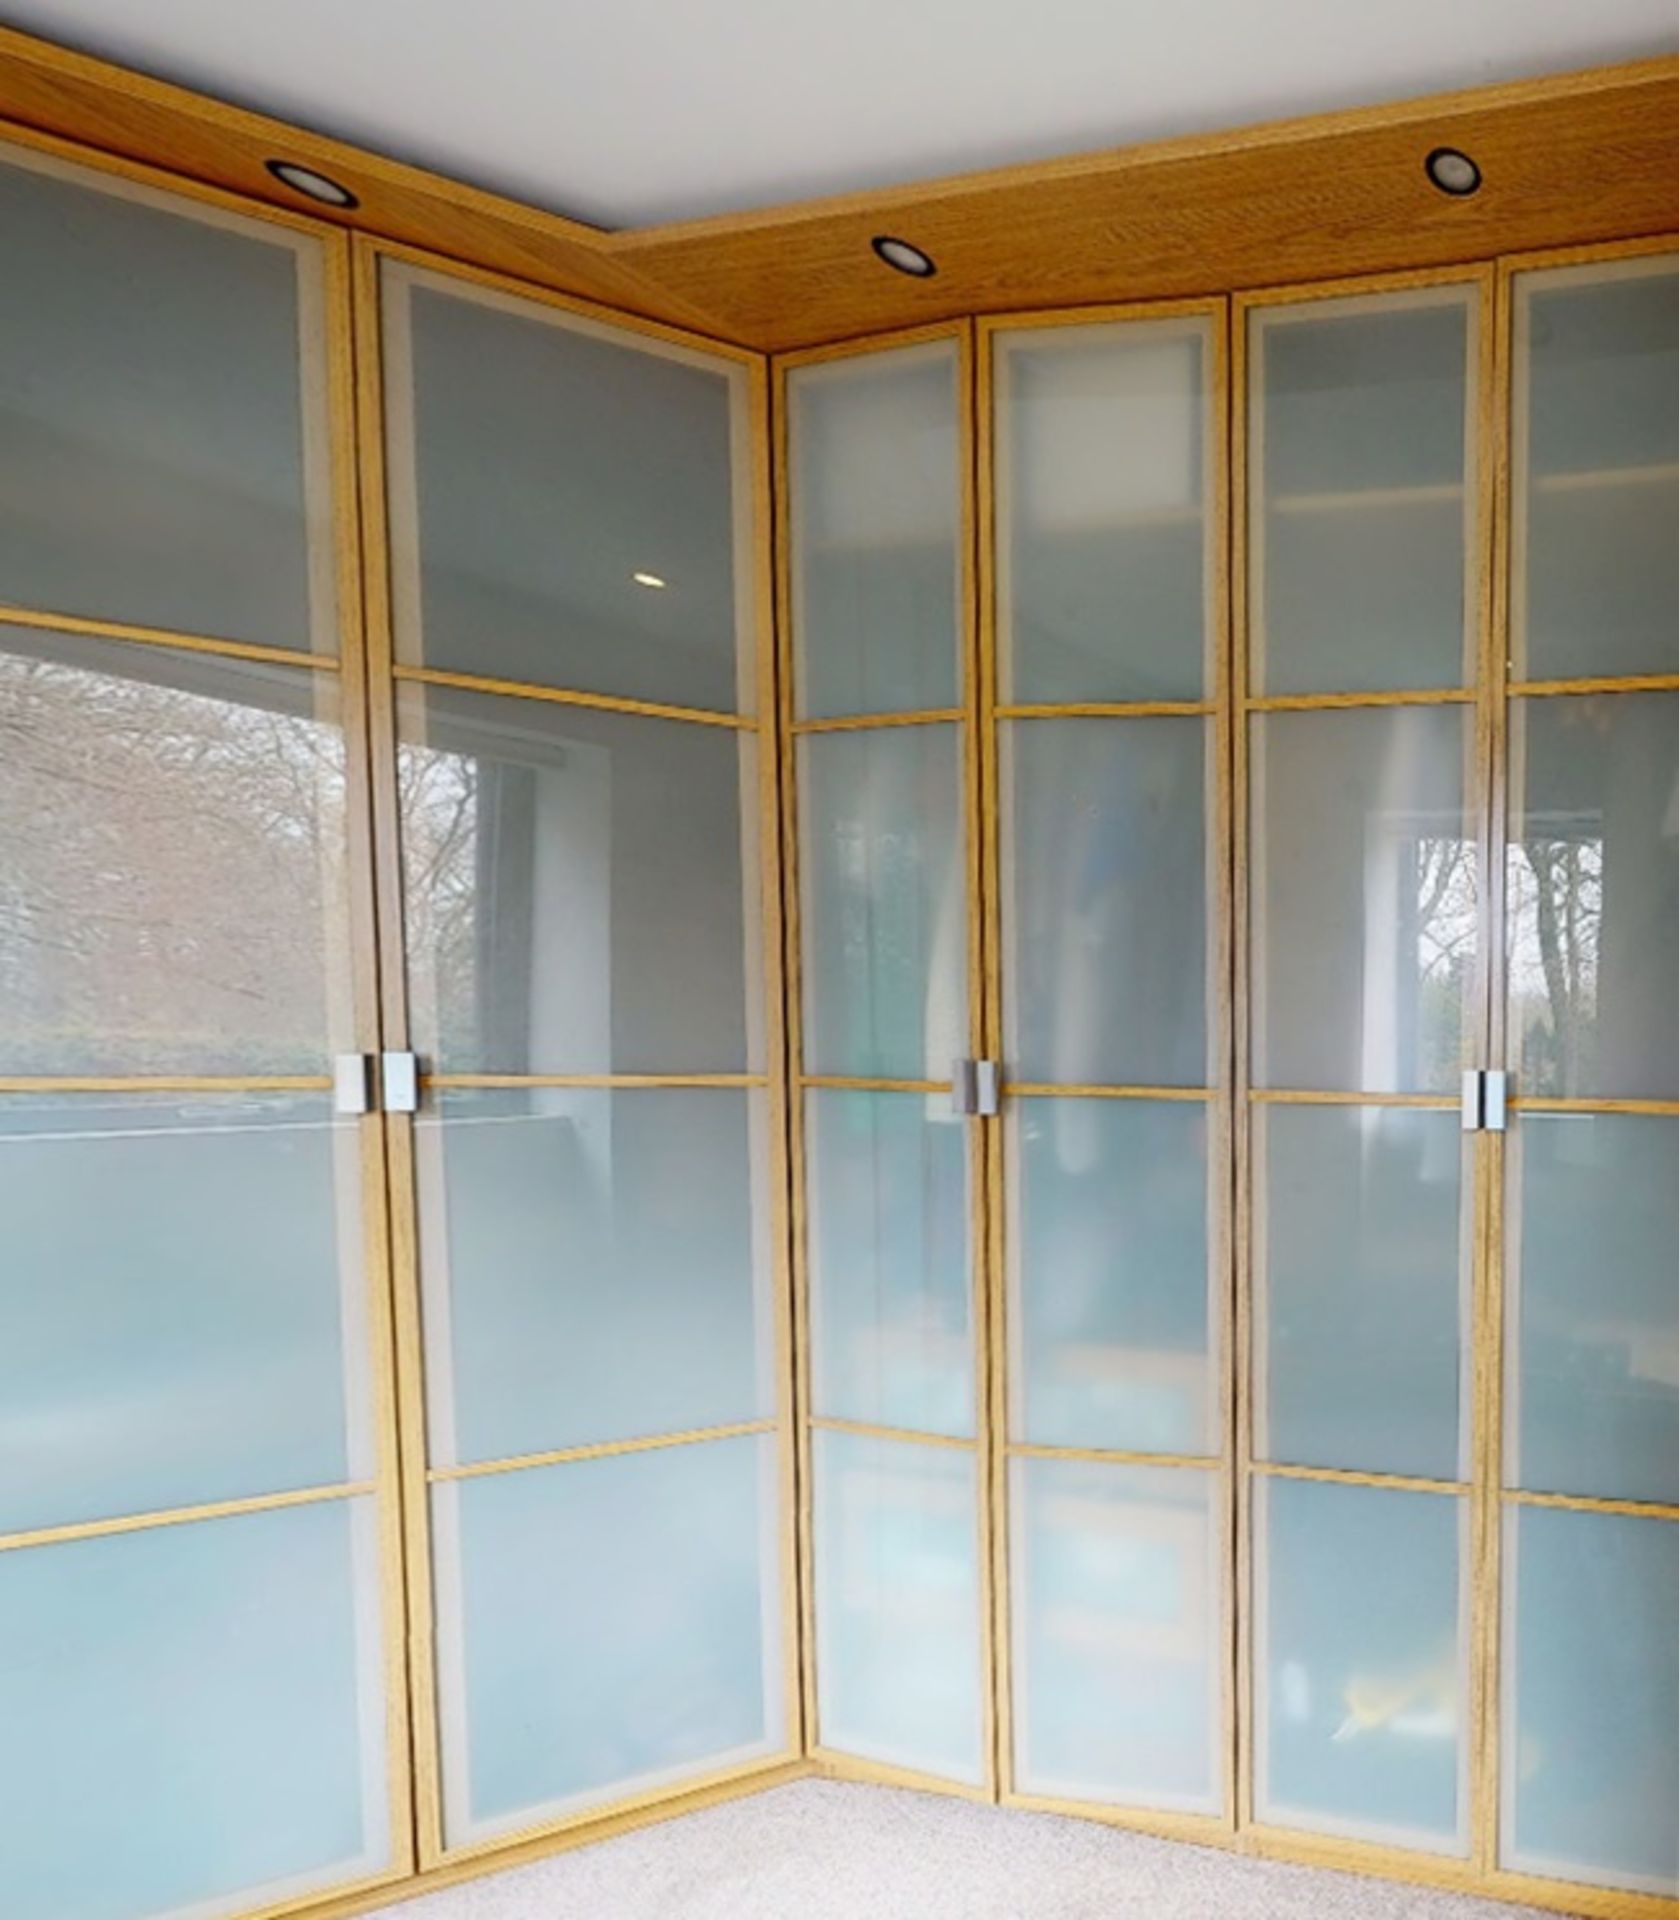 Large Bank Of Bespoke Fitted Master Bedroom Wardrobe Storage With Frosted Glass 8-Door Frontage - - Image 5 of 8